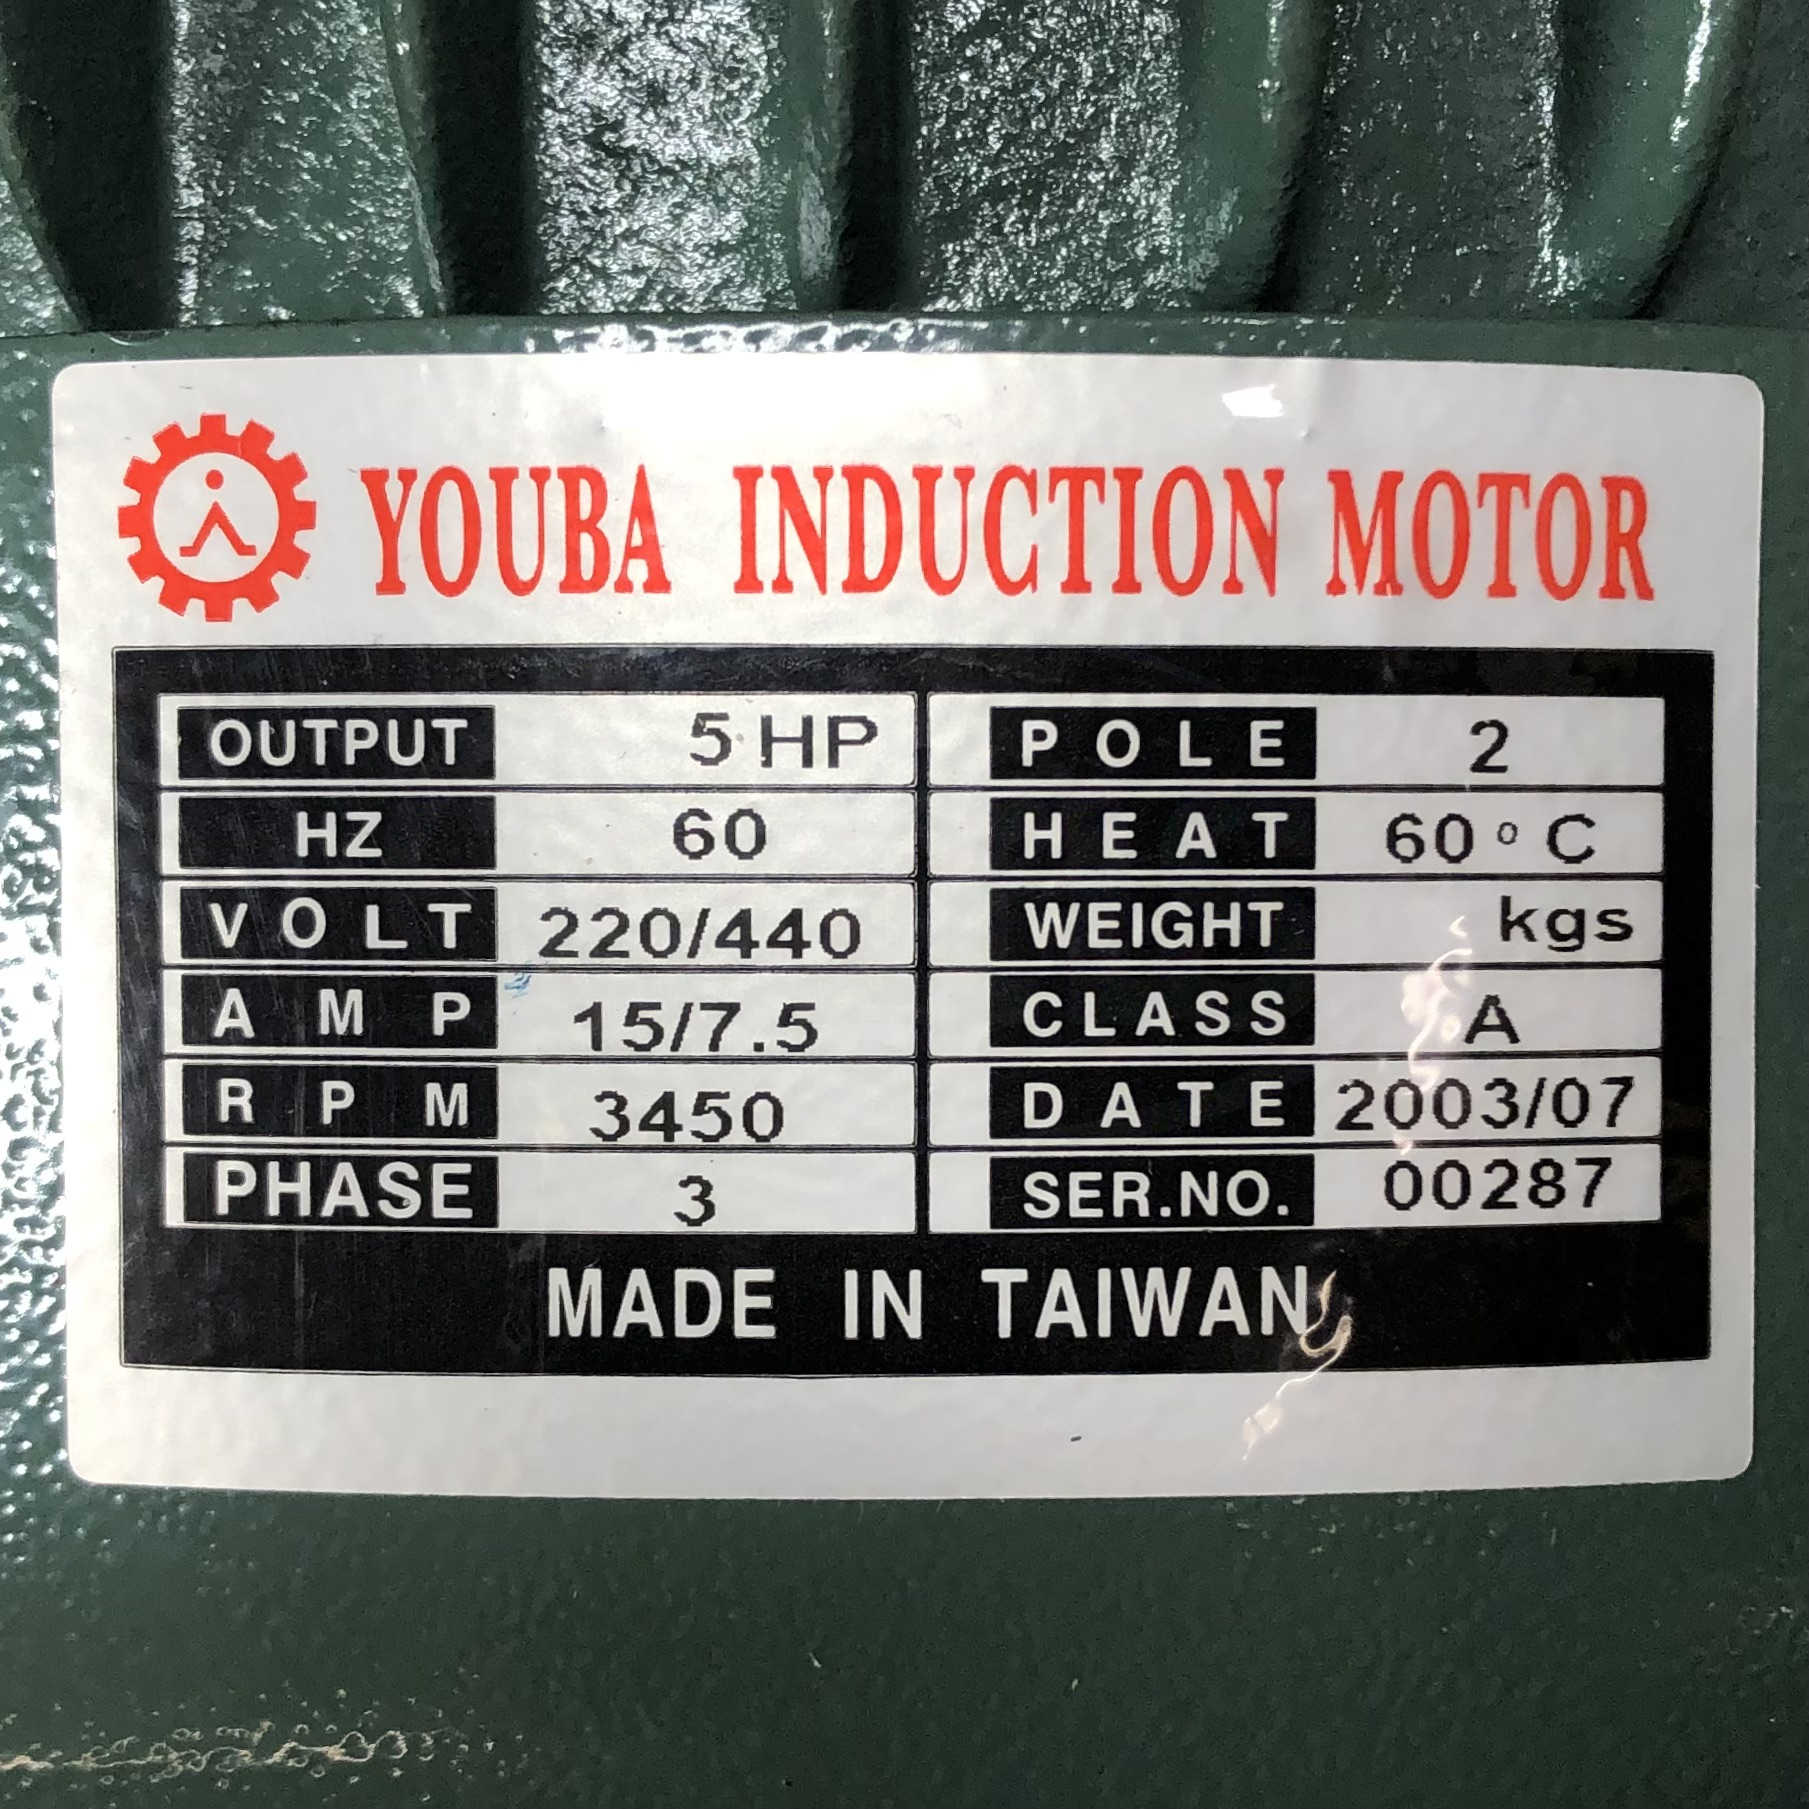 BW005A Youba Induction Motor 5Hp, 60Hz, 220-440V, 15/7.5A, 3450RPM, 3Phase 5